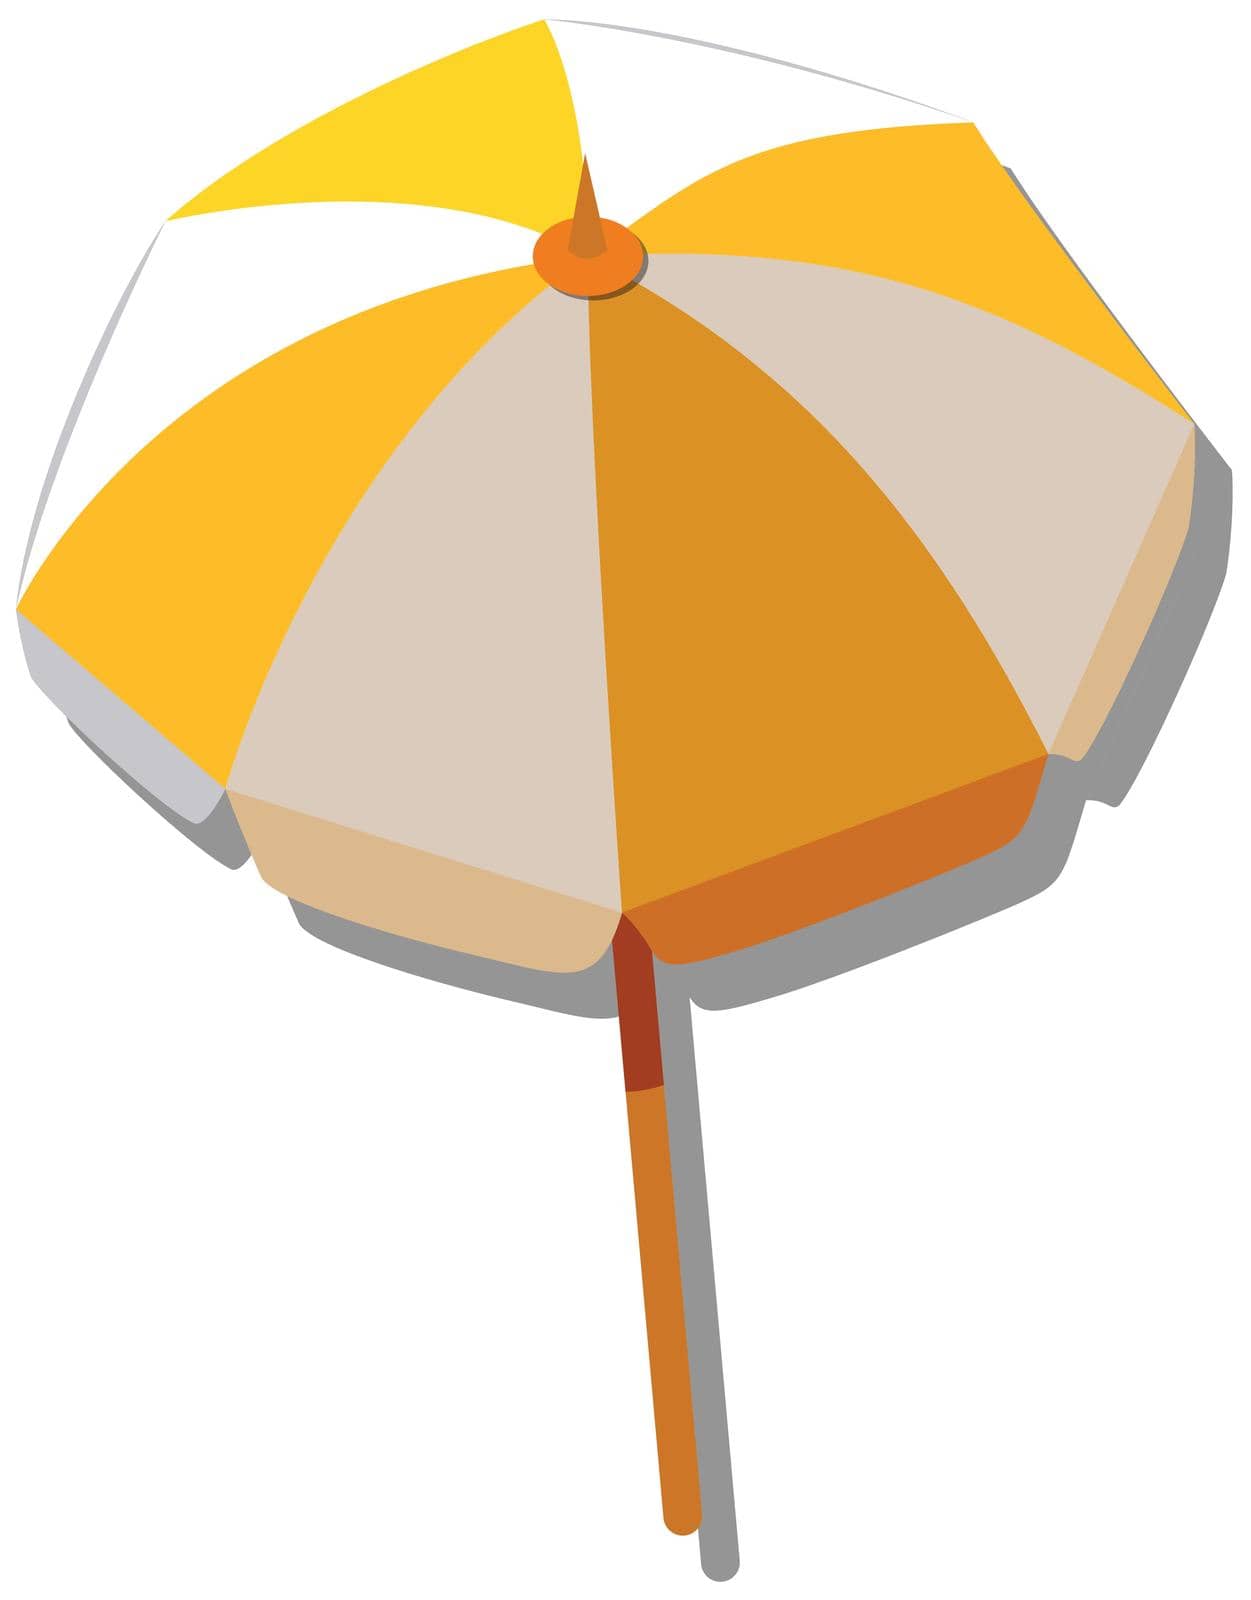 Single umbrella with yellow and white striped illustration